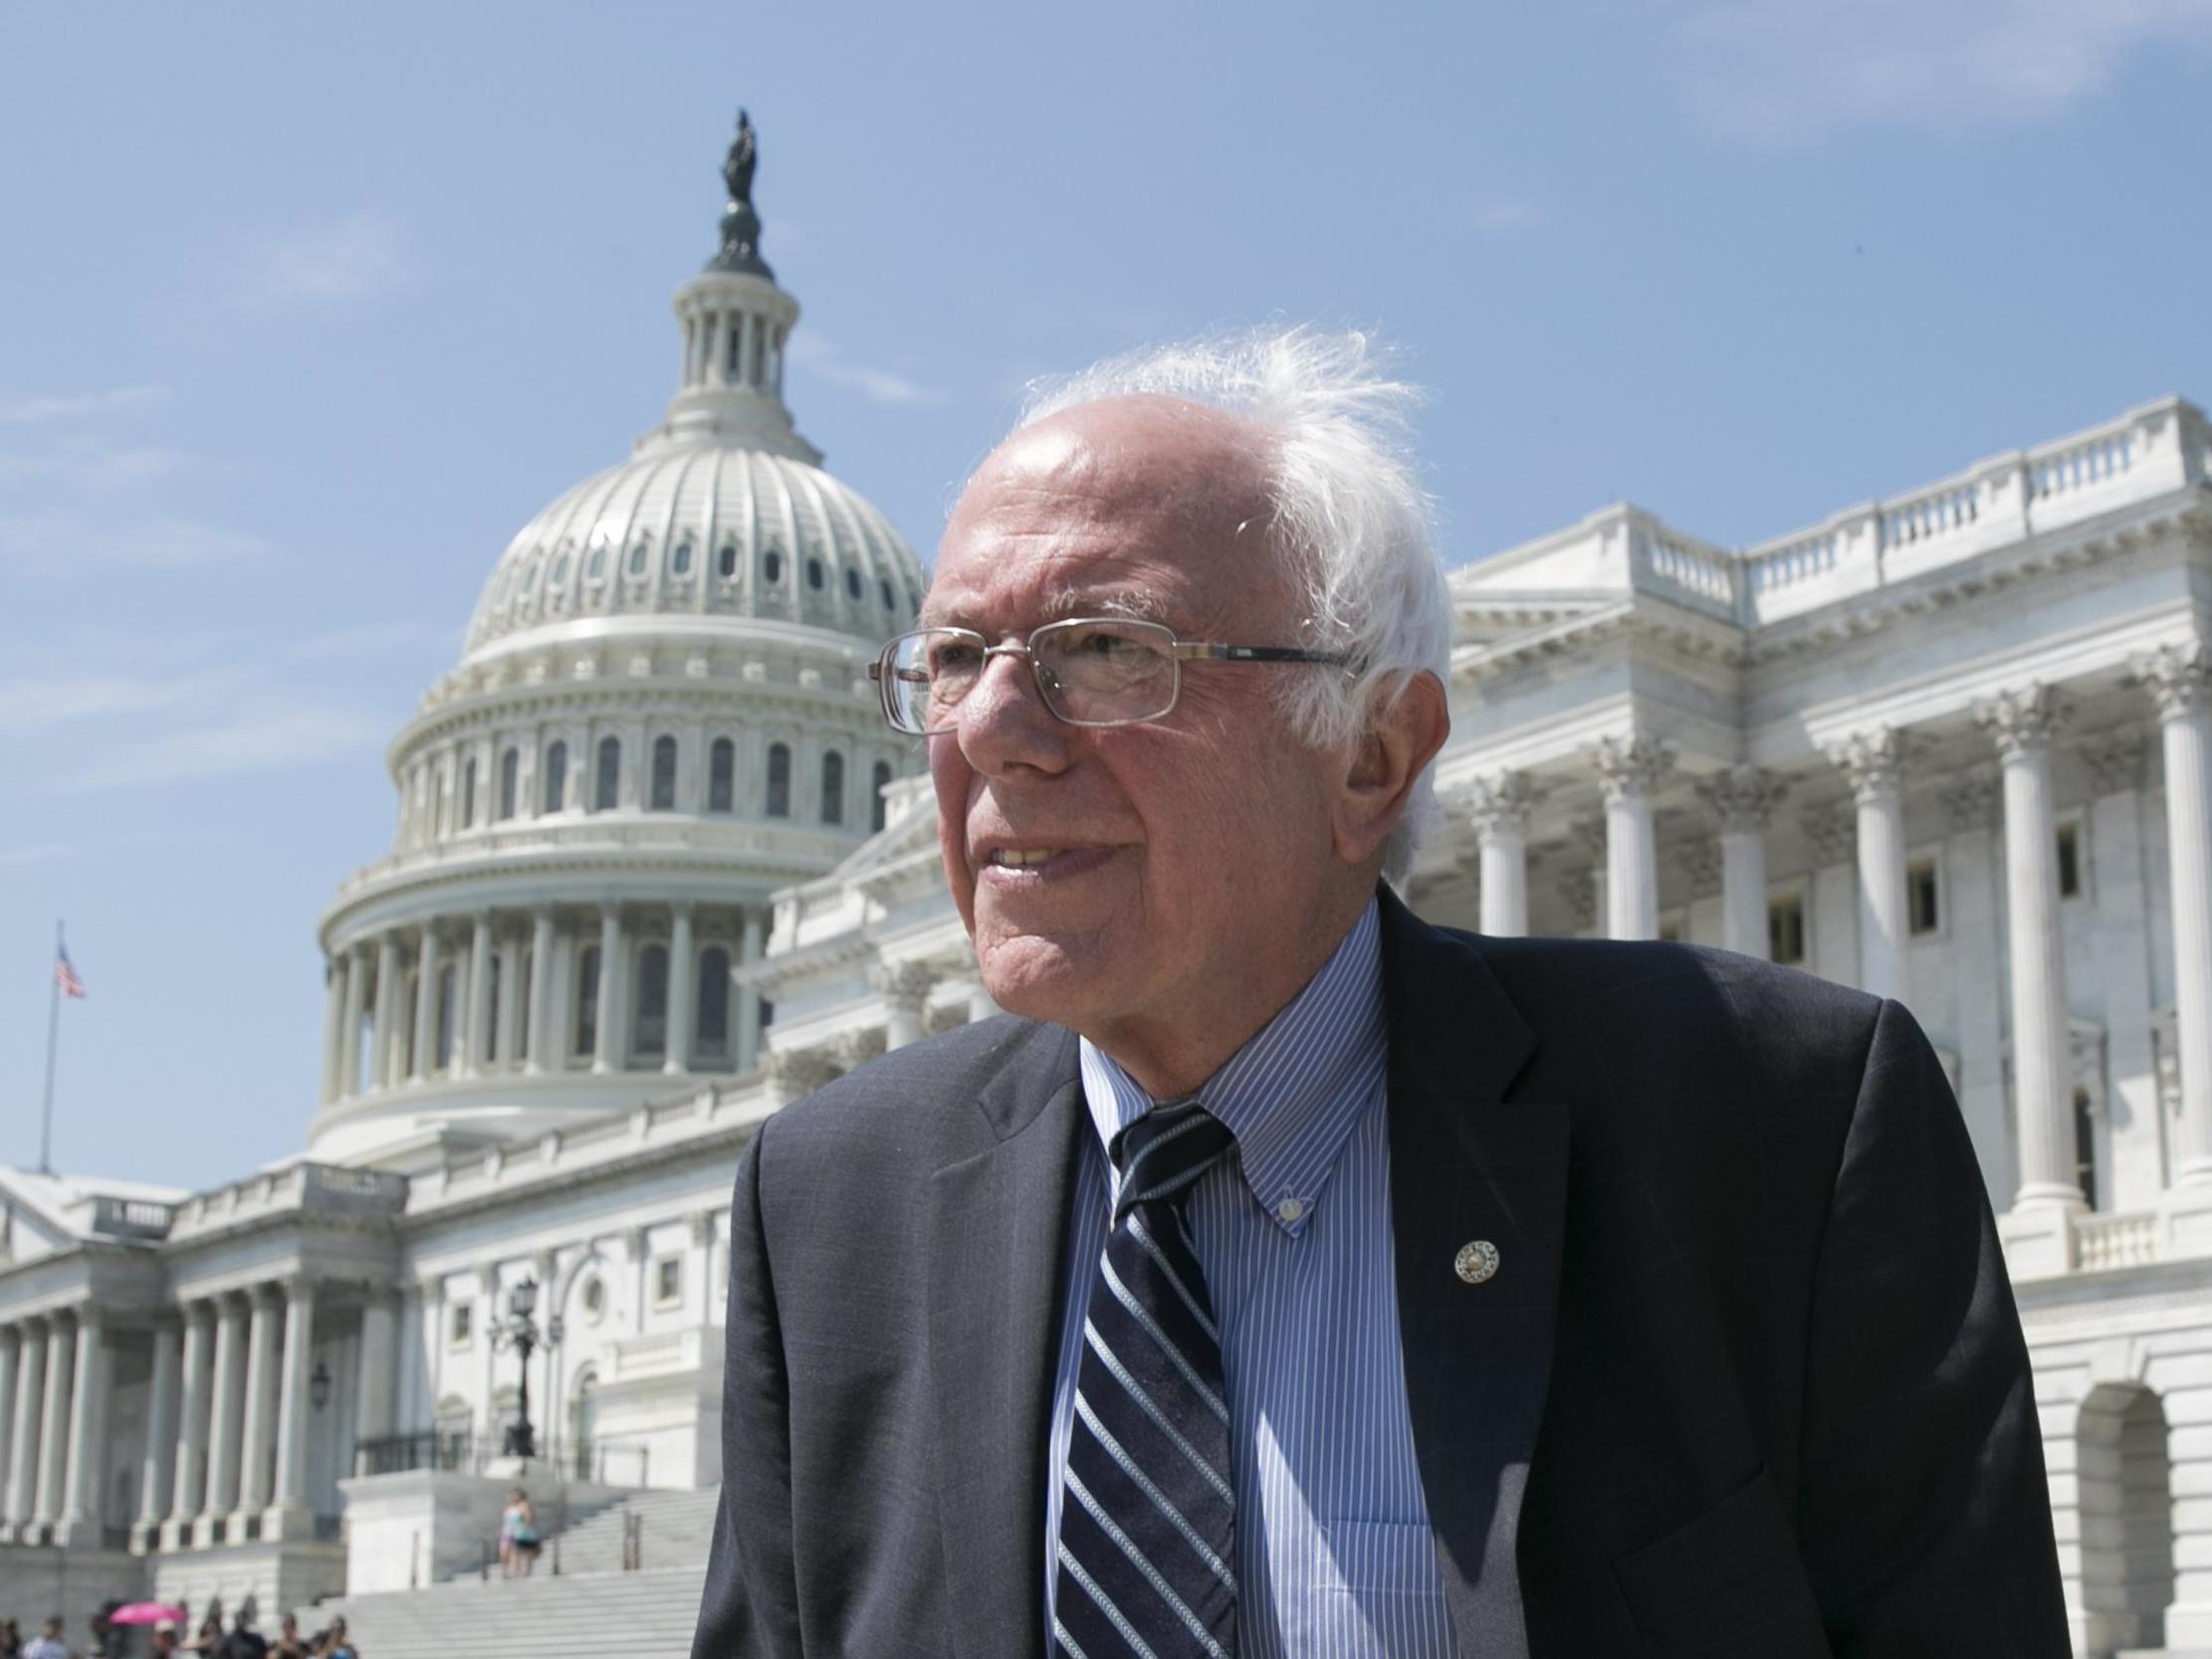 Independent Senator from Vermont Bernie Sanders walks outside the Capitol Building in Washington DC USA 02 August 2017